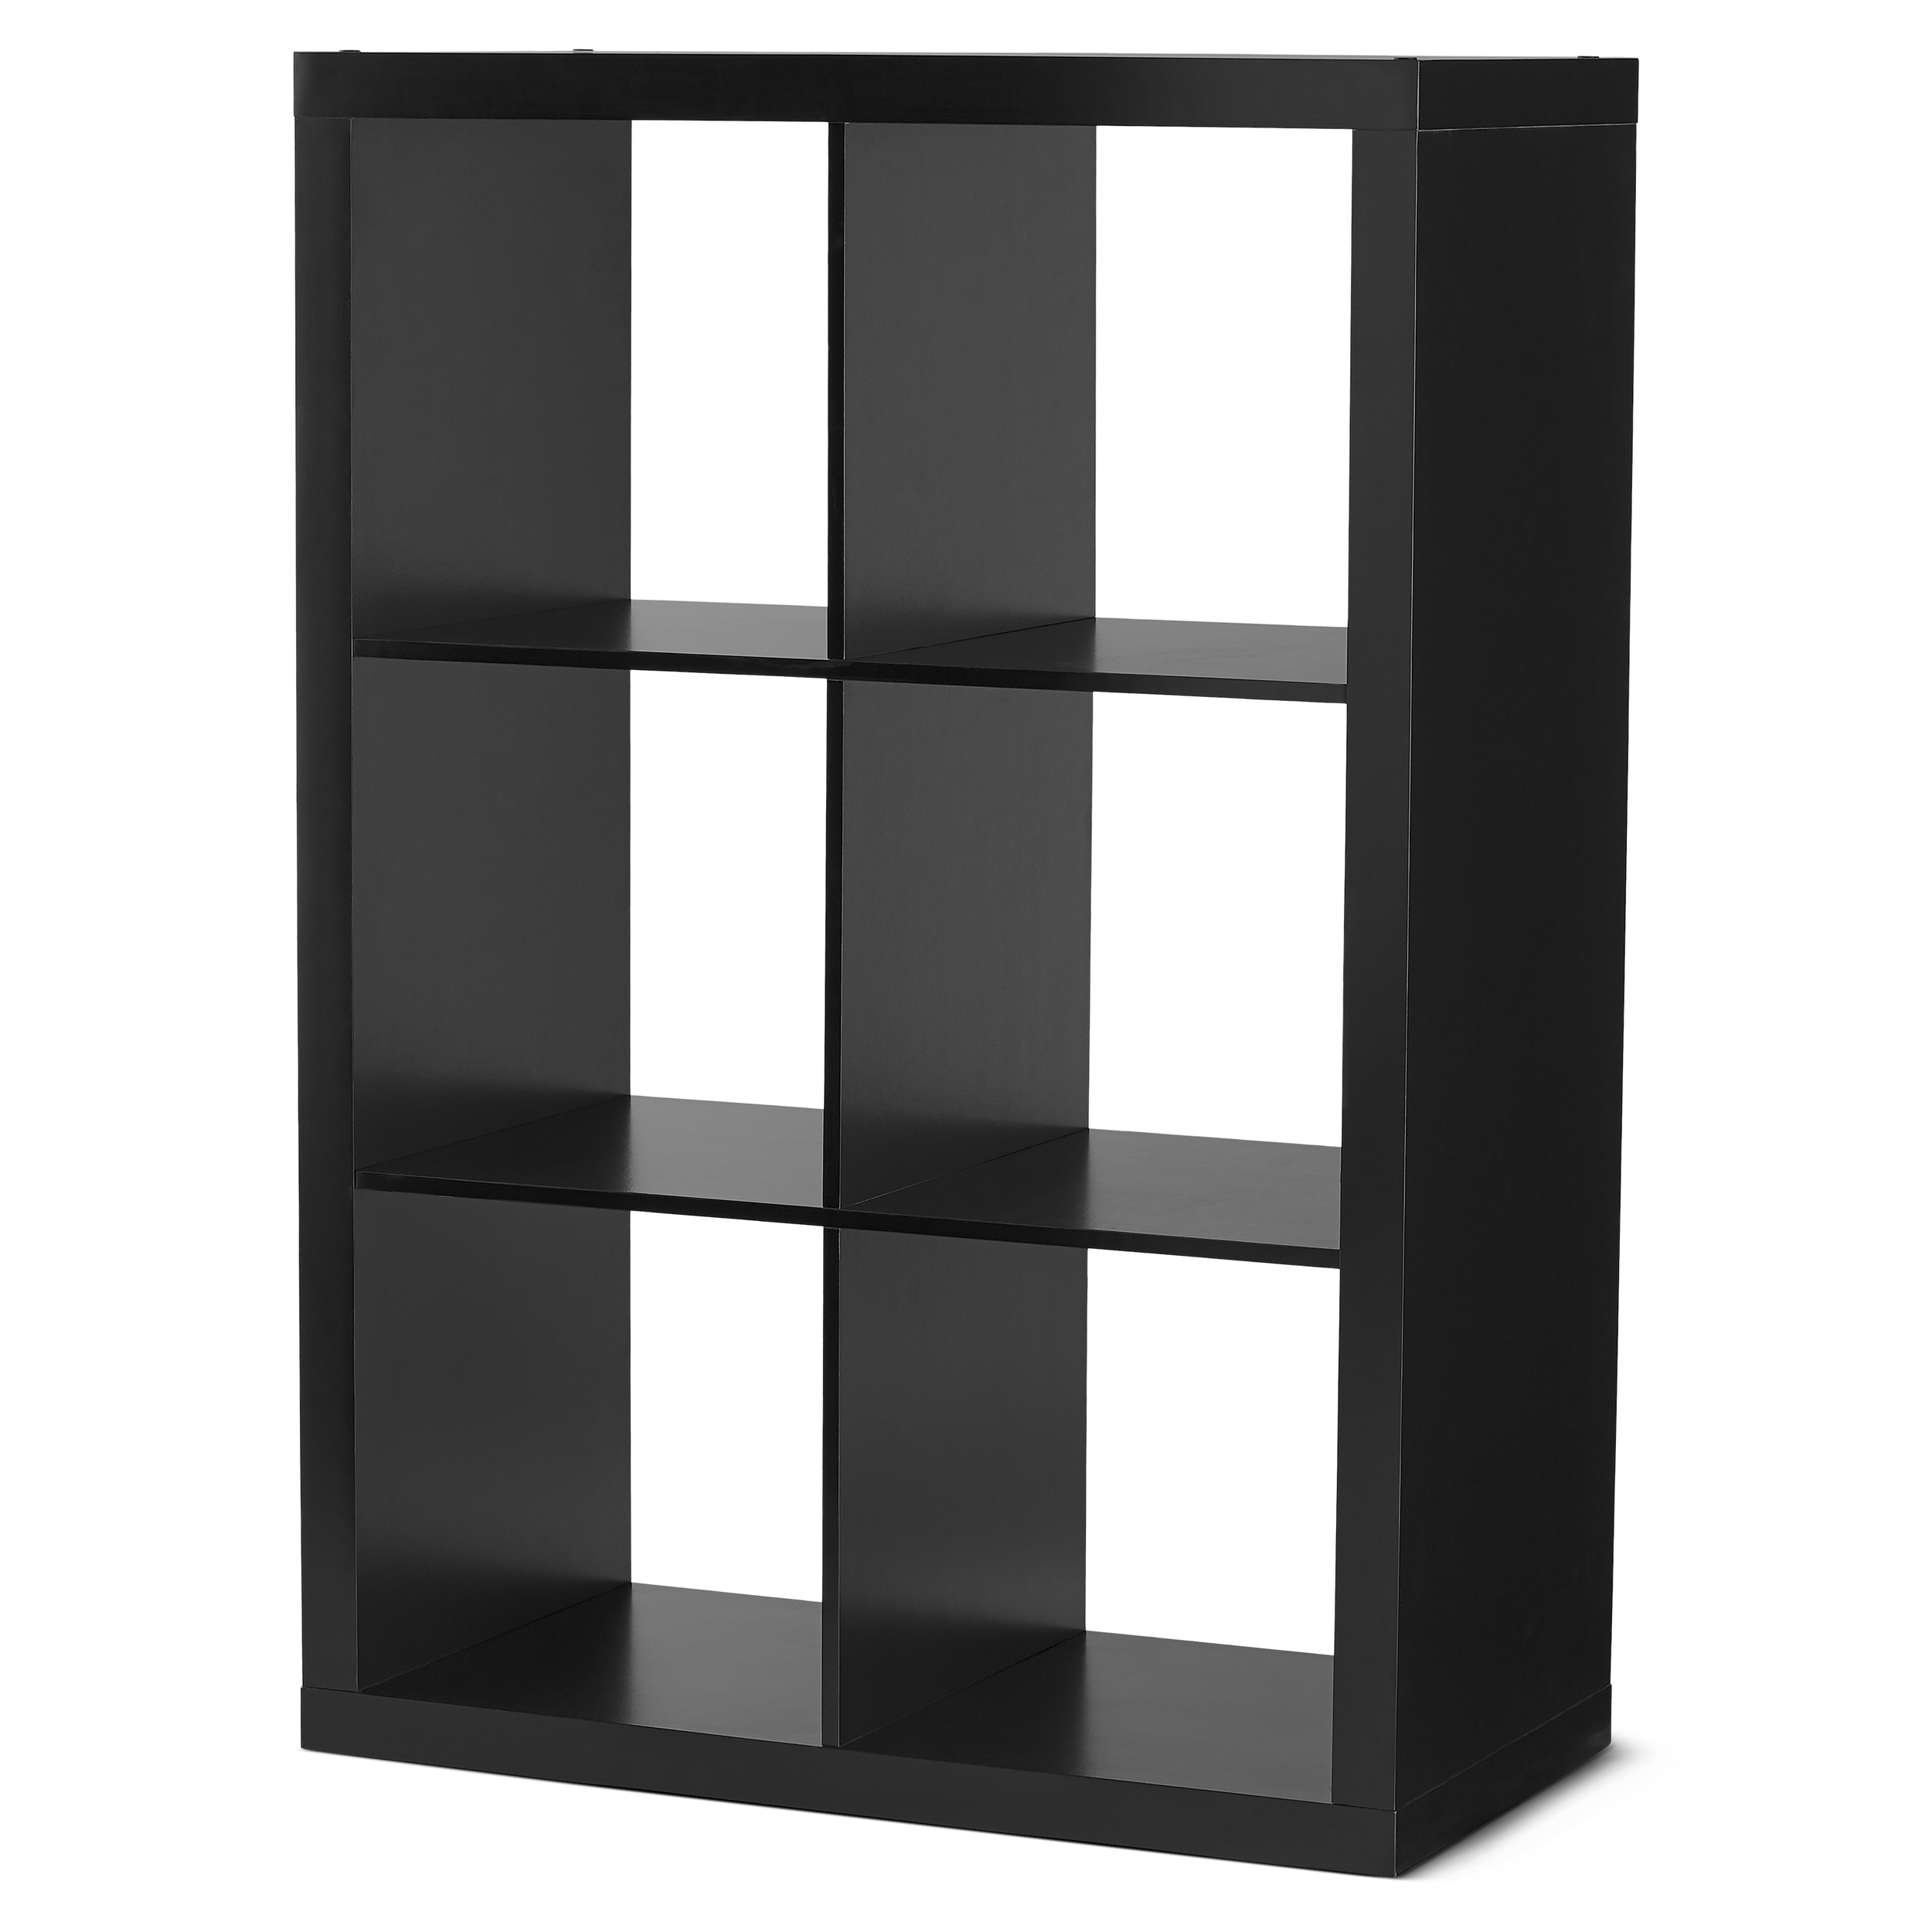 Better Homes & Gardens 6-Cube Storage Organizer, Solid Black - image 2 of 9